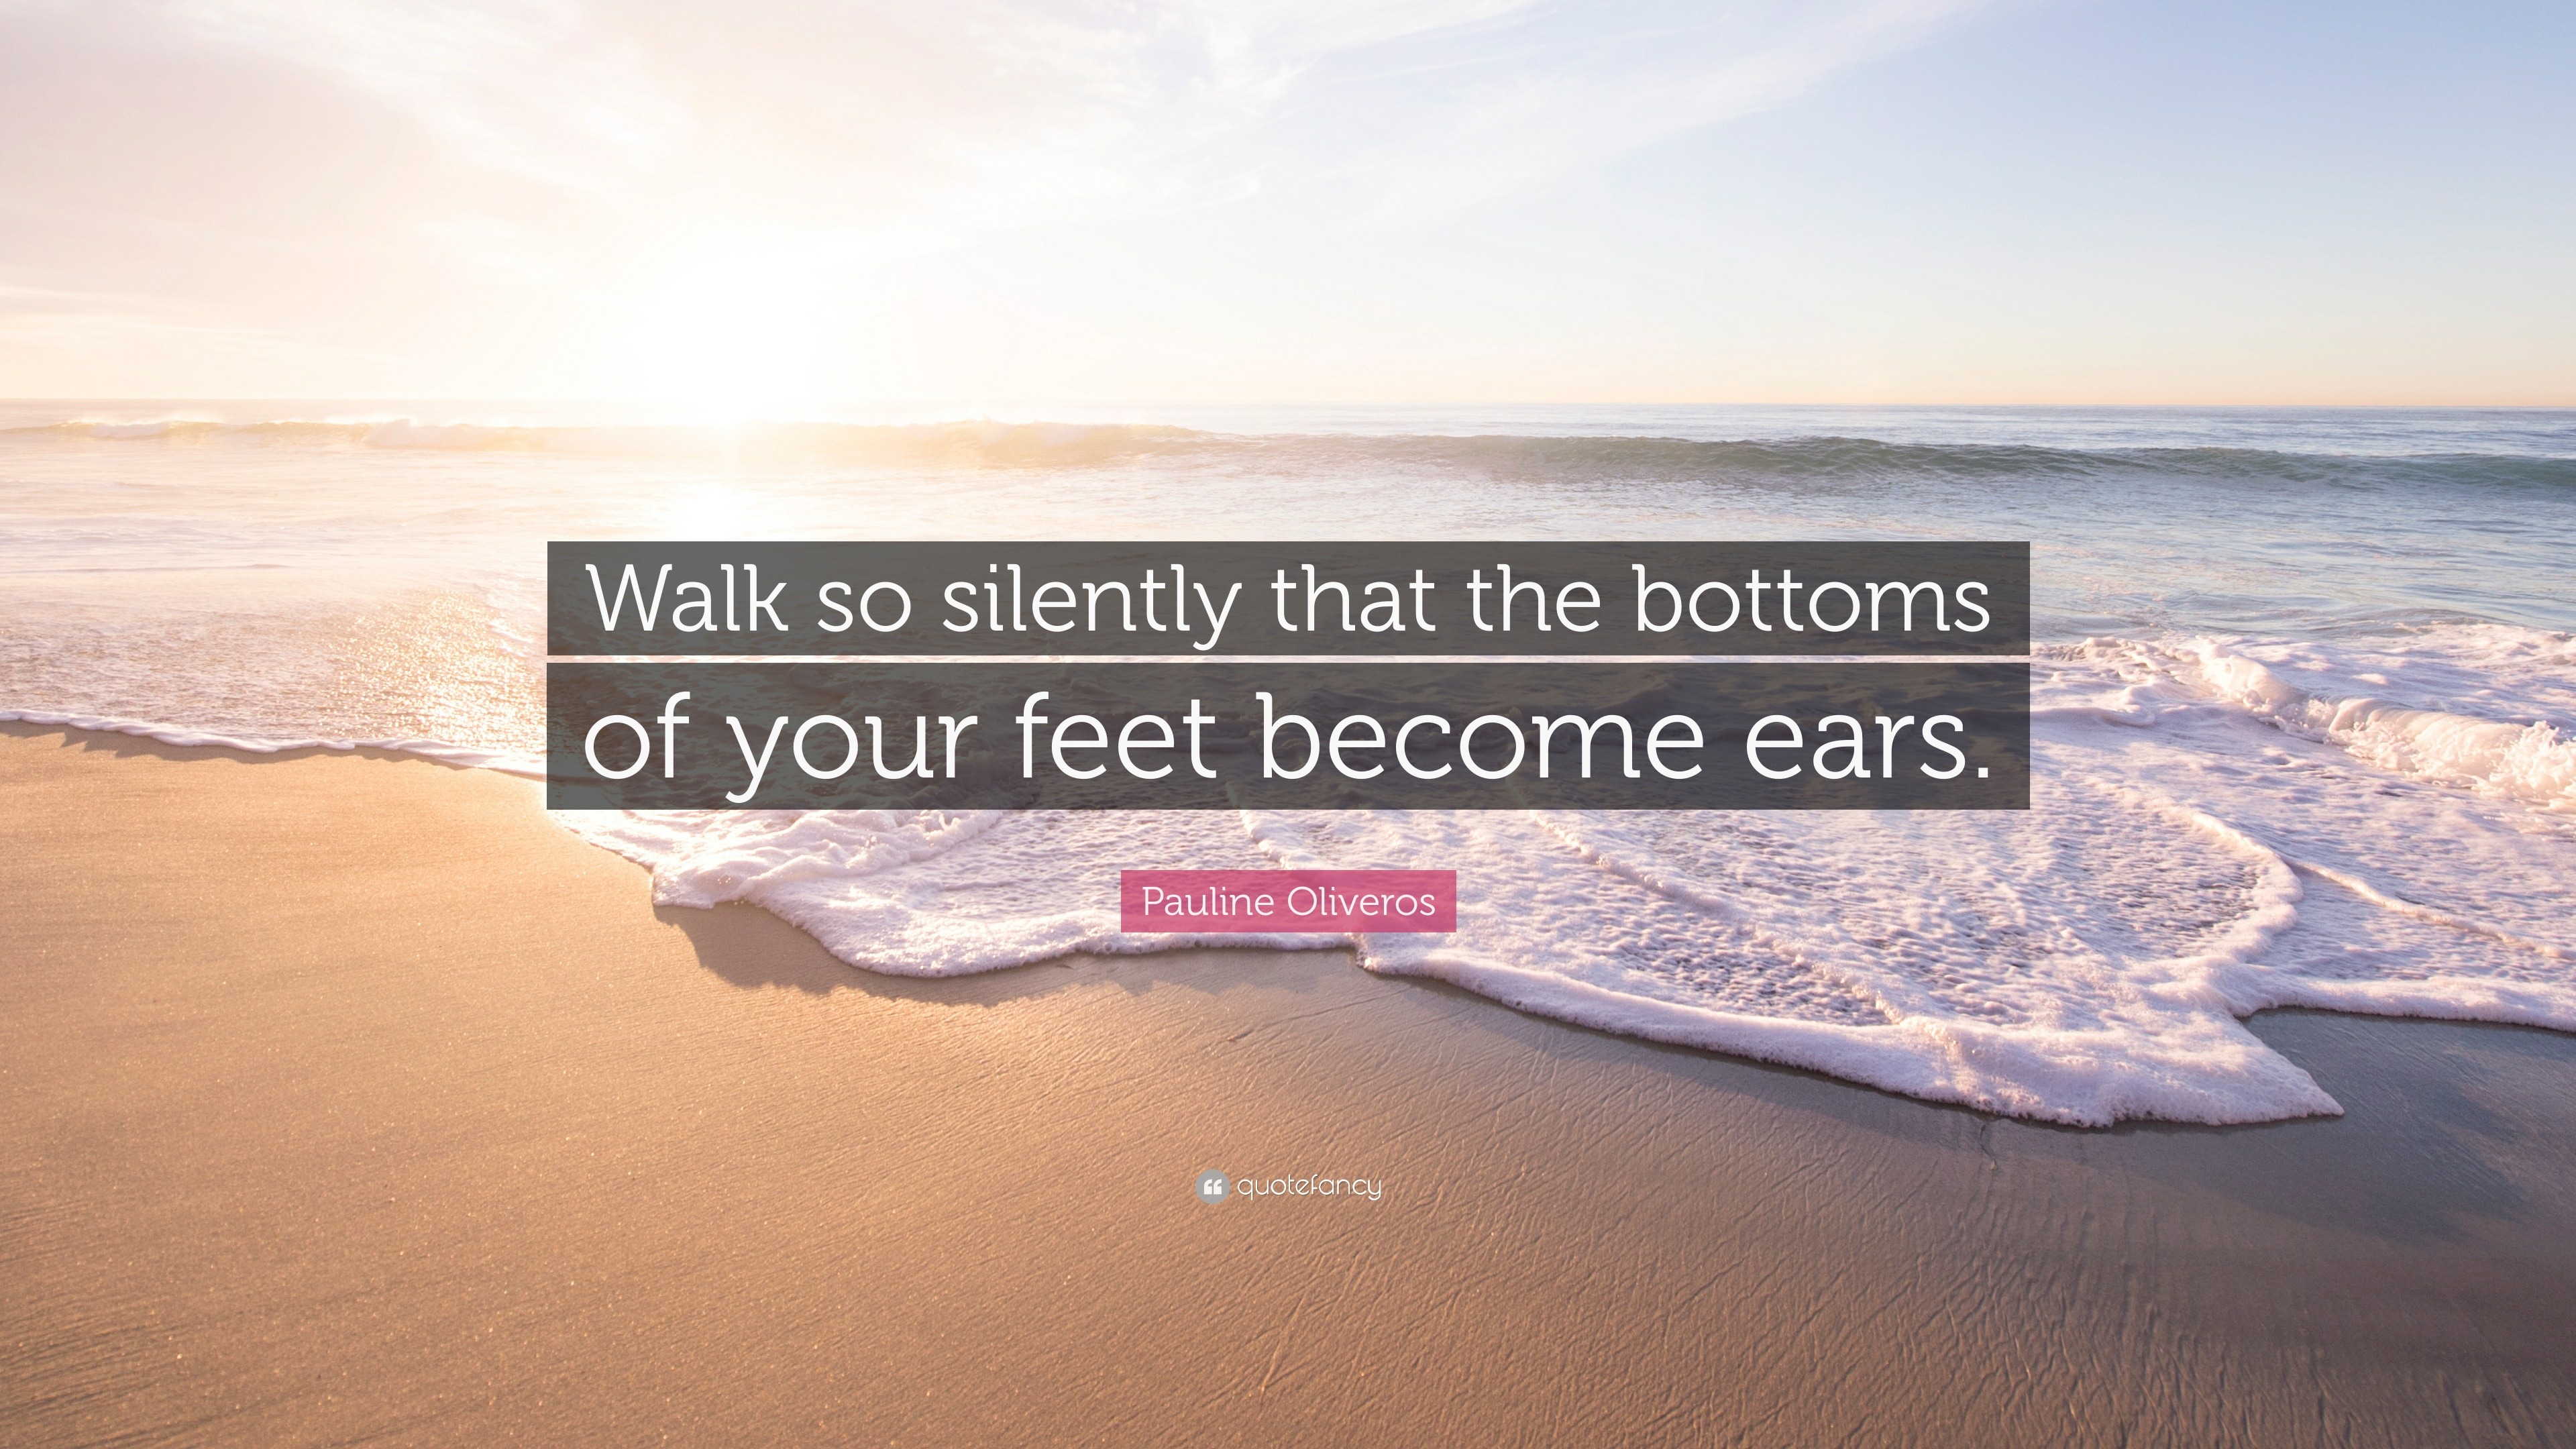 https://quotefancy.com/media/wallpaper/3840x2160/1810988-Pauline-Oliveros-Quote-Walk-so-silently-that-the-bottoms-of-your.jpg